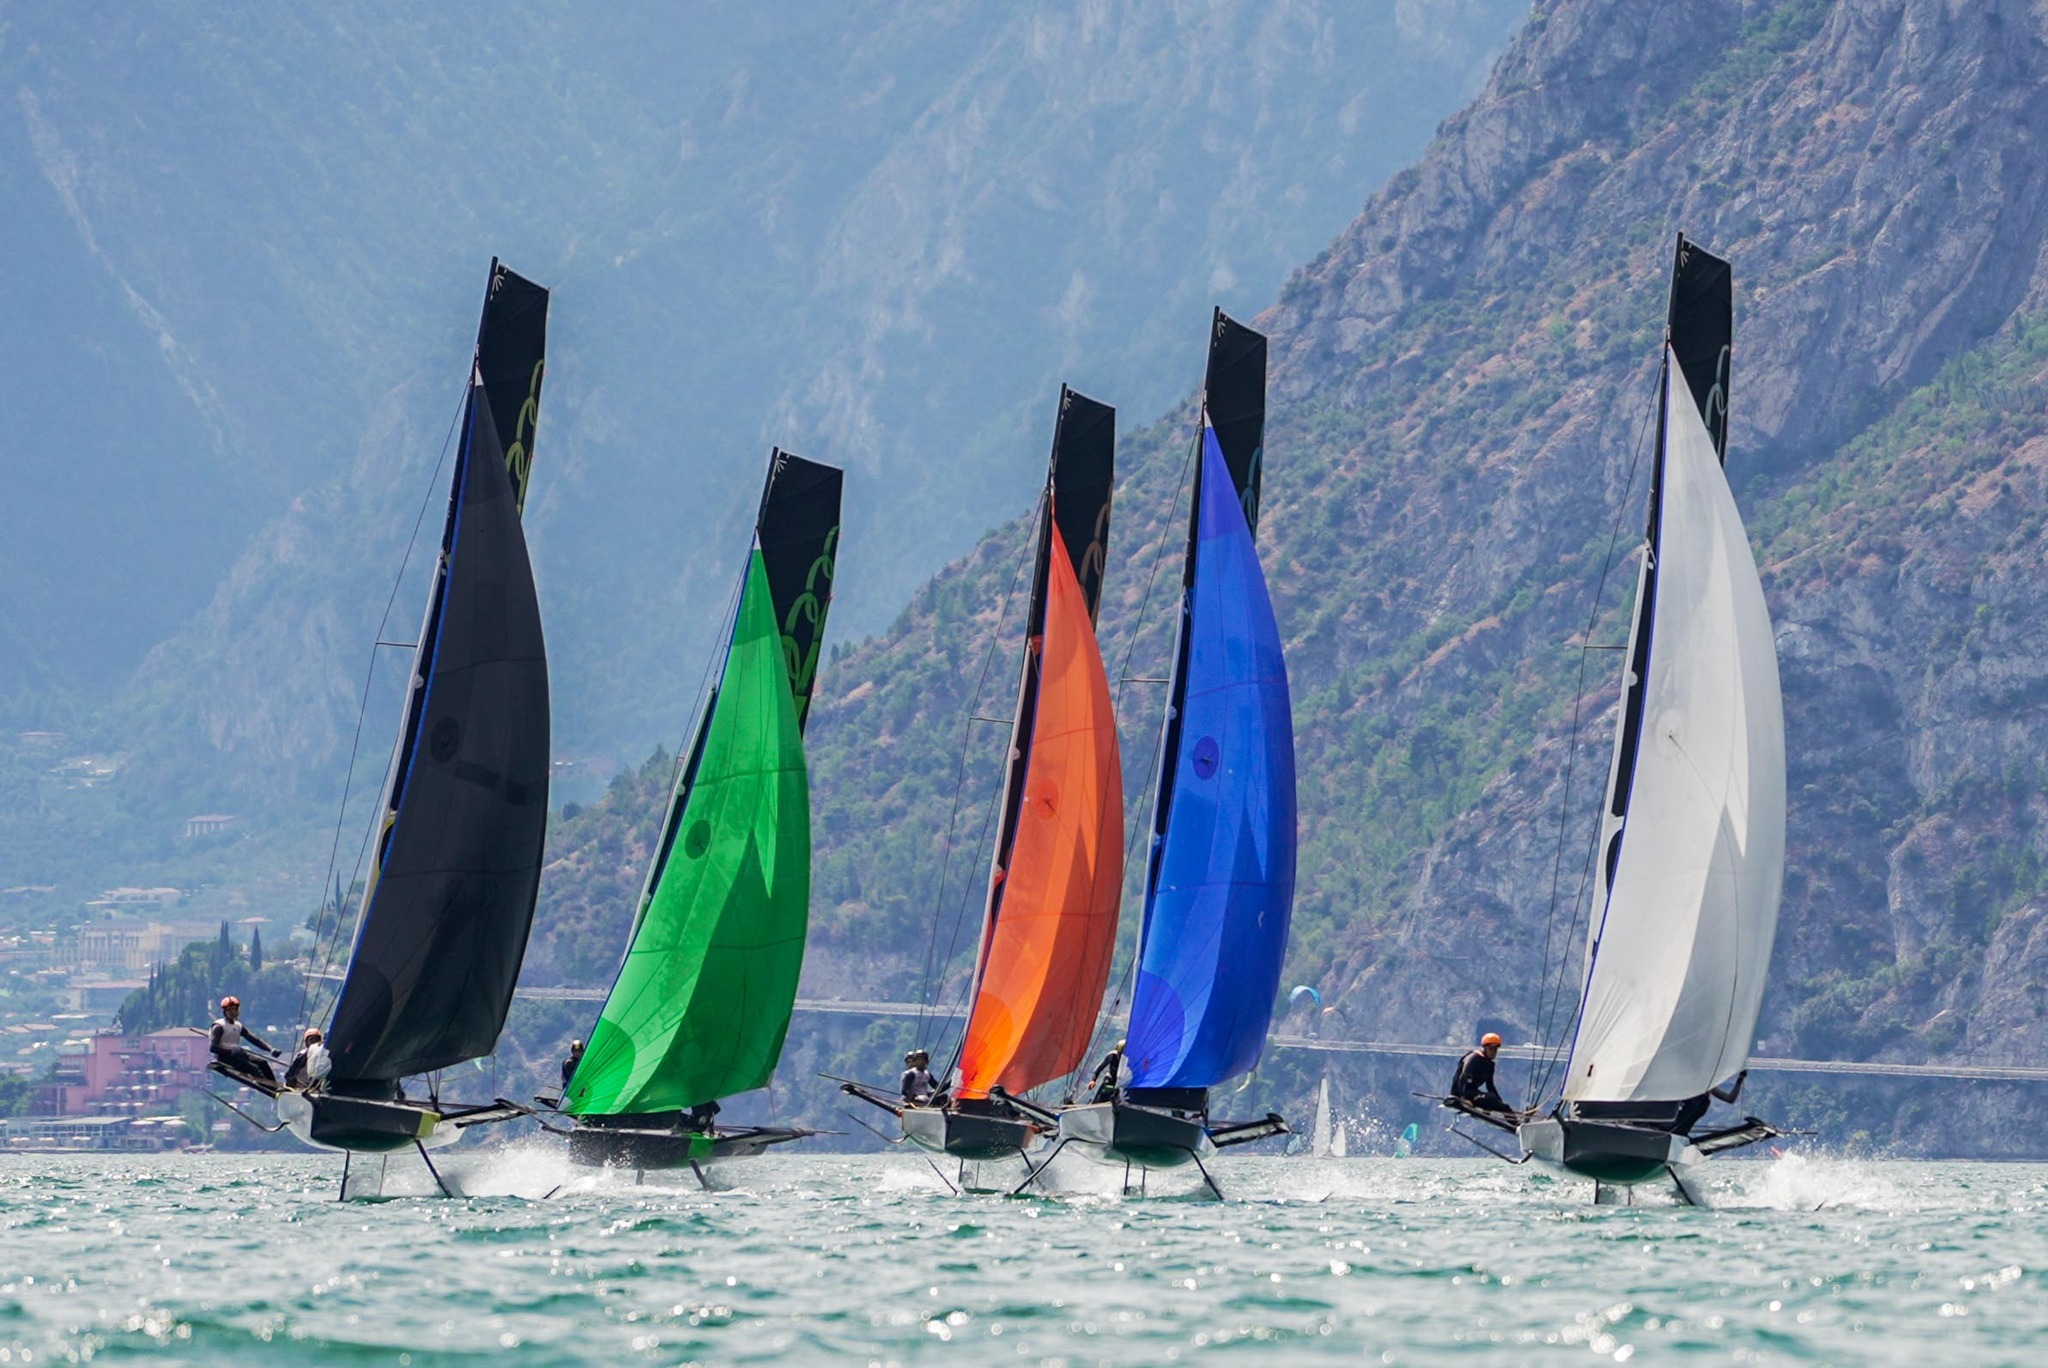  Persico 69F  Youth Foiling Gold Cup  Act 4  Torbole ITA  Final results